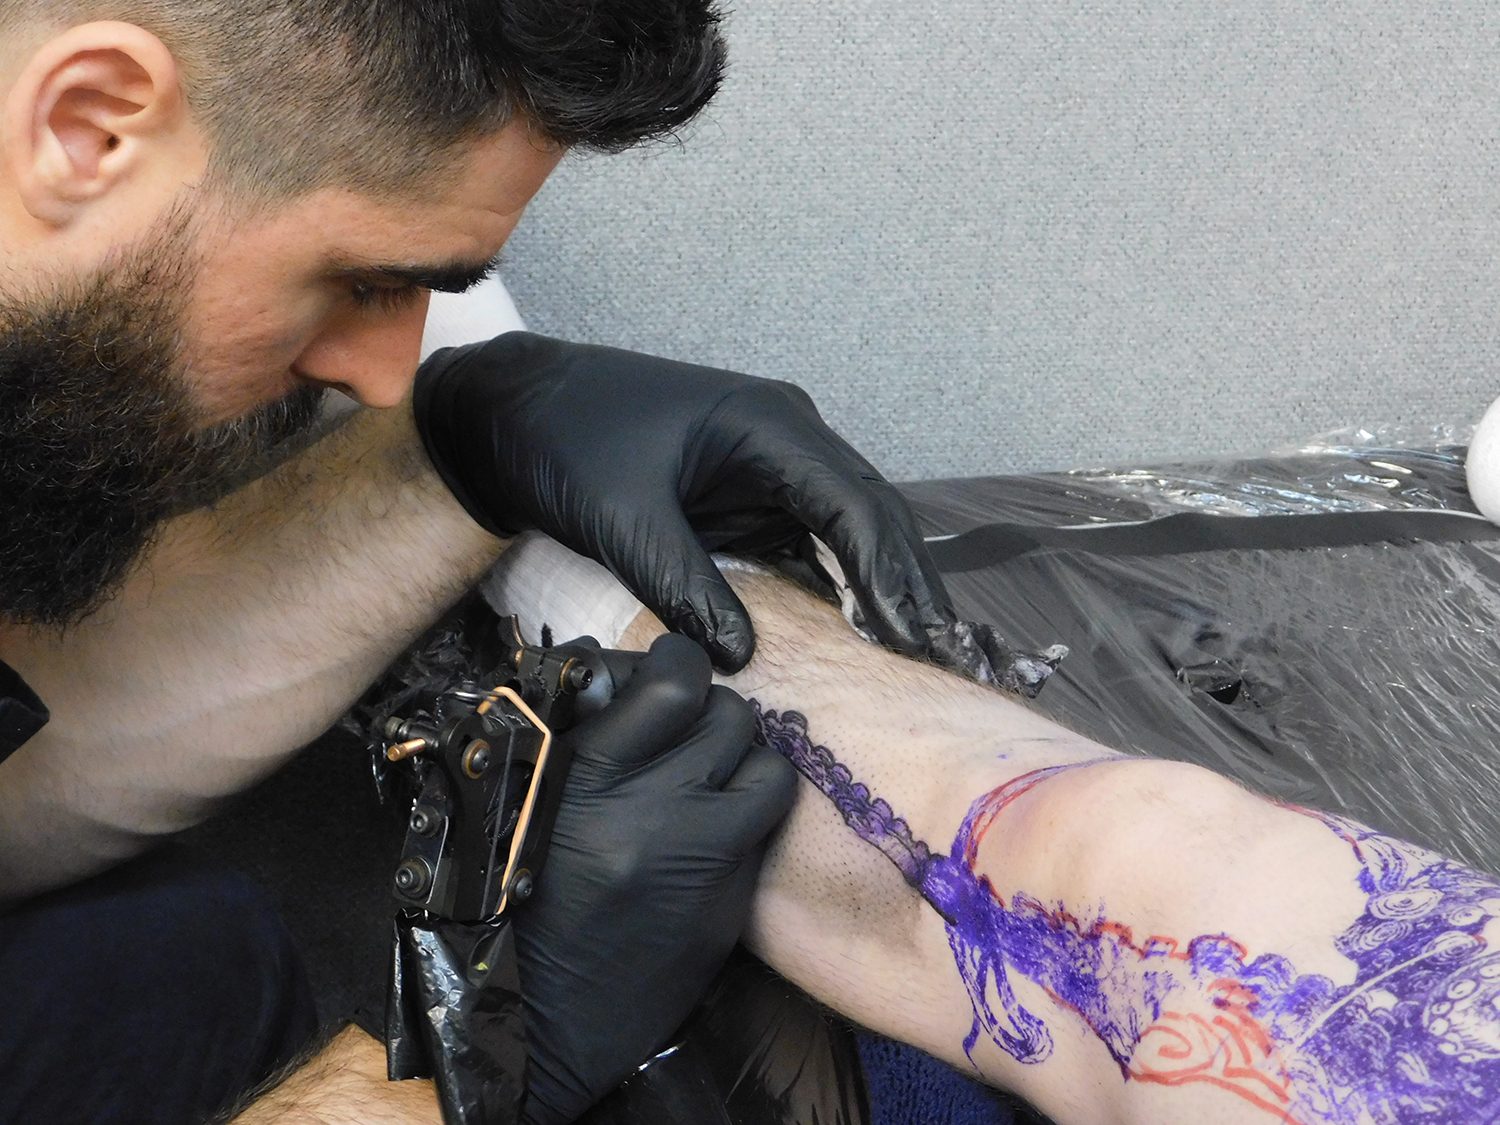 Frederico rabelo tattooing at london tattoo convention, octopus